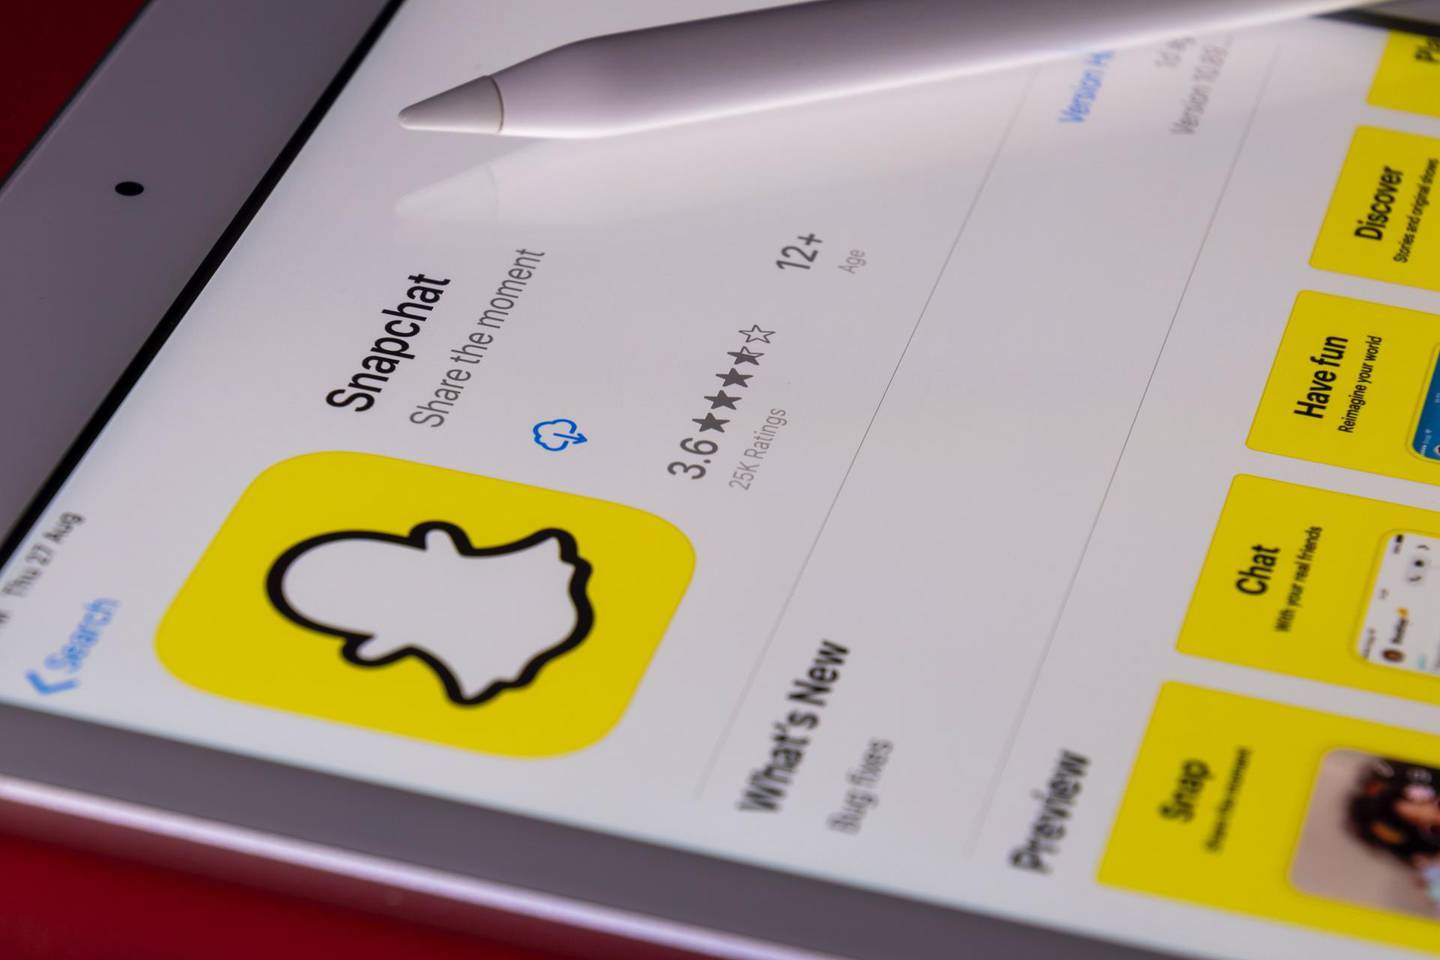 Snapchat is a popular social media platform across the Middle East and North Africa. Unsplash